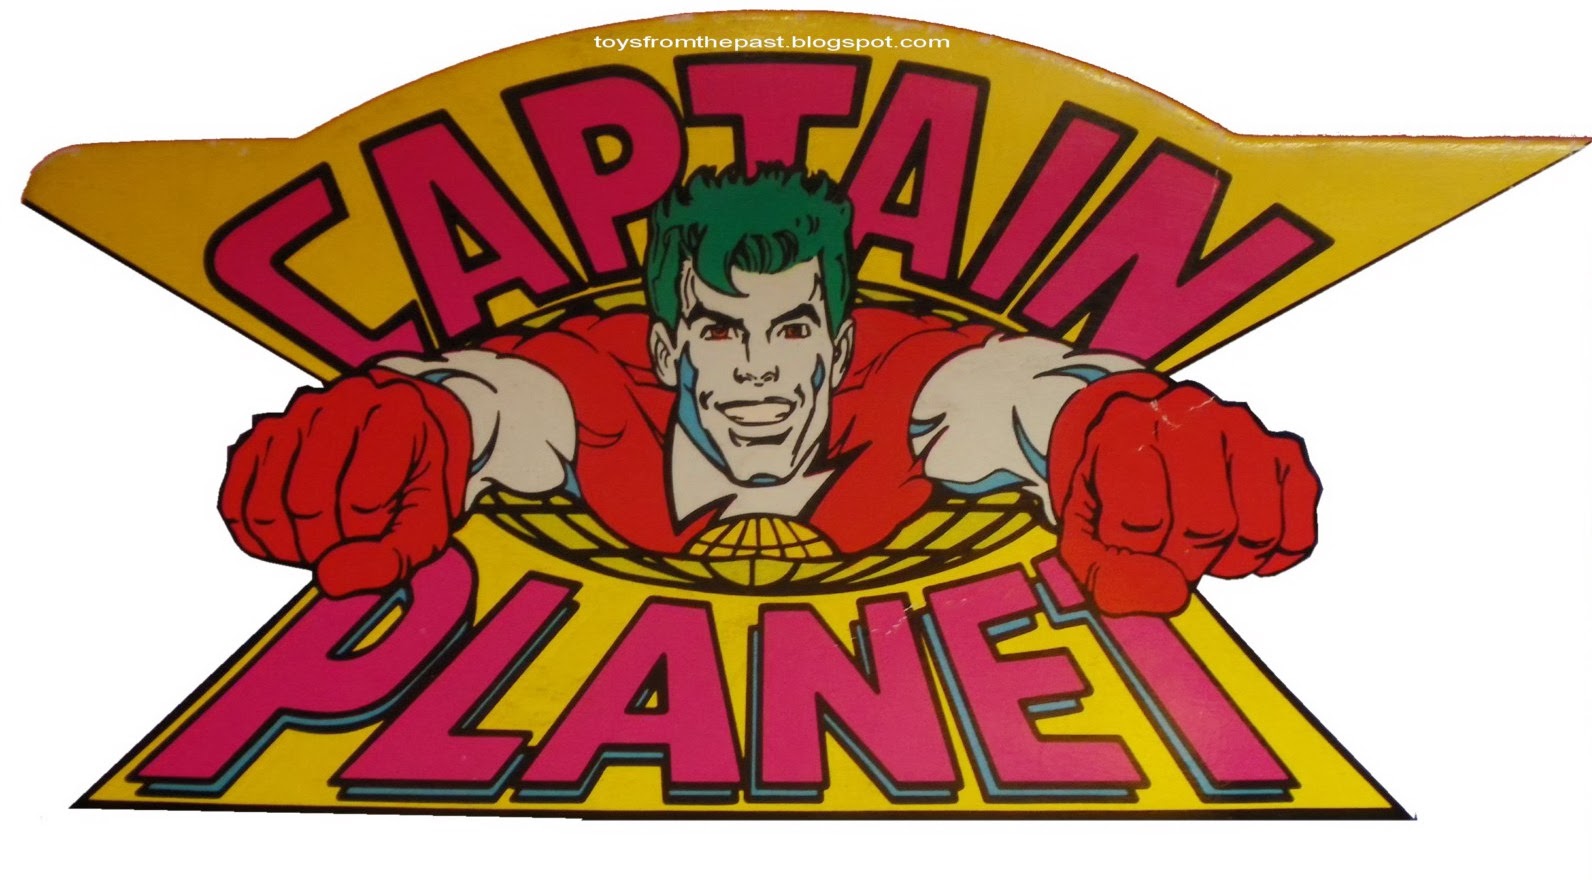 Captain Planet And The Planeteers Backgrounds, Compatible - PC, Mobile, Gadgets| 1592x888 px